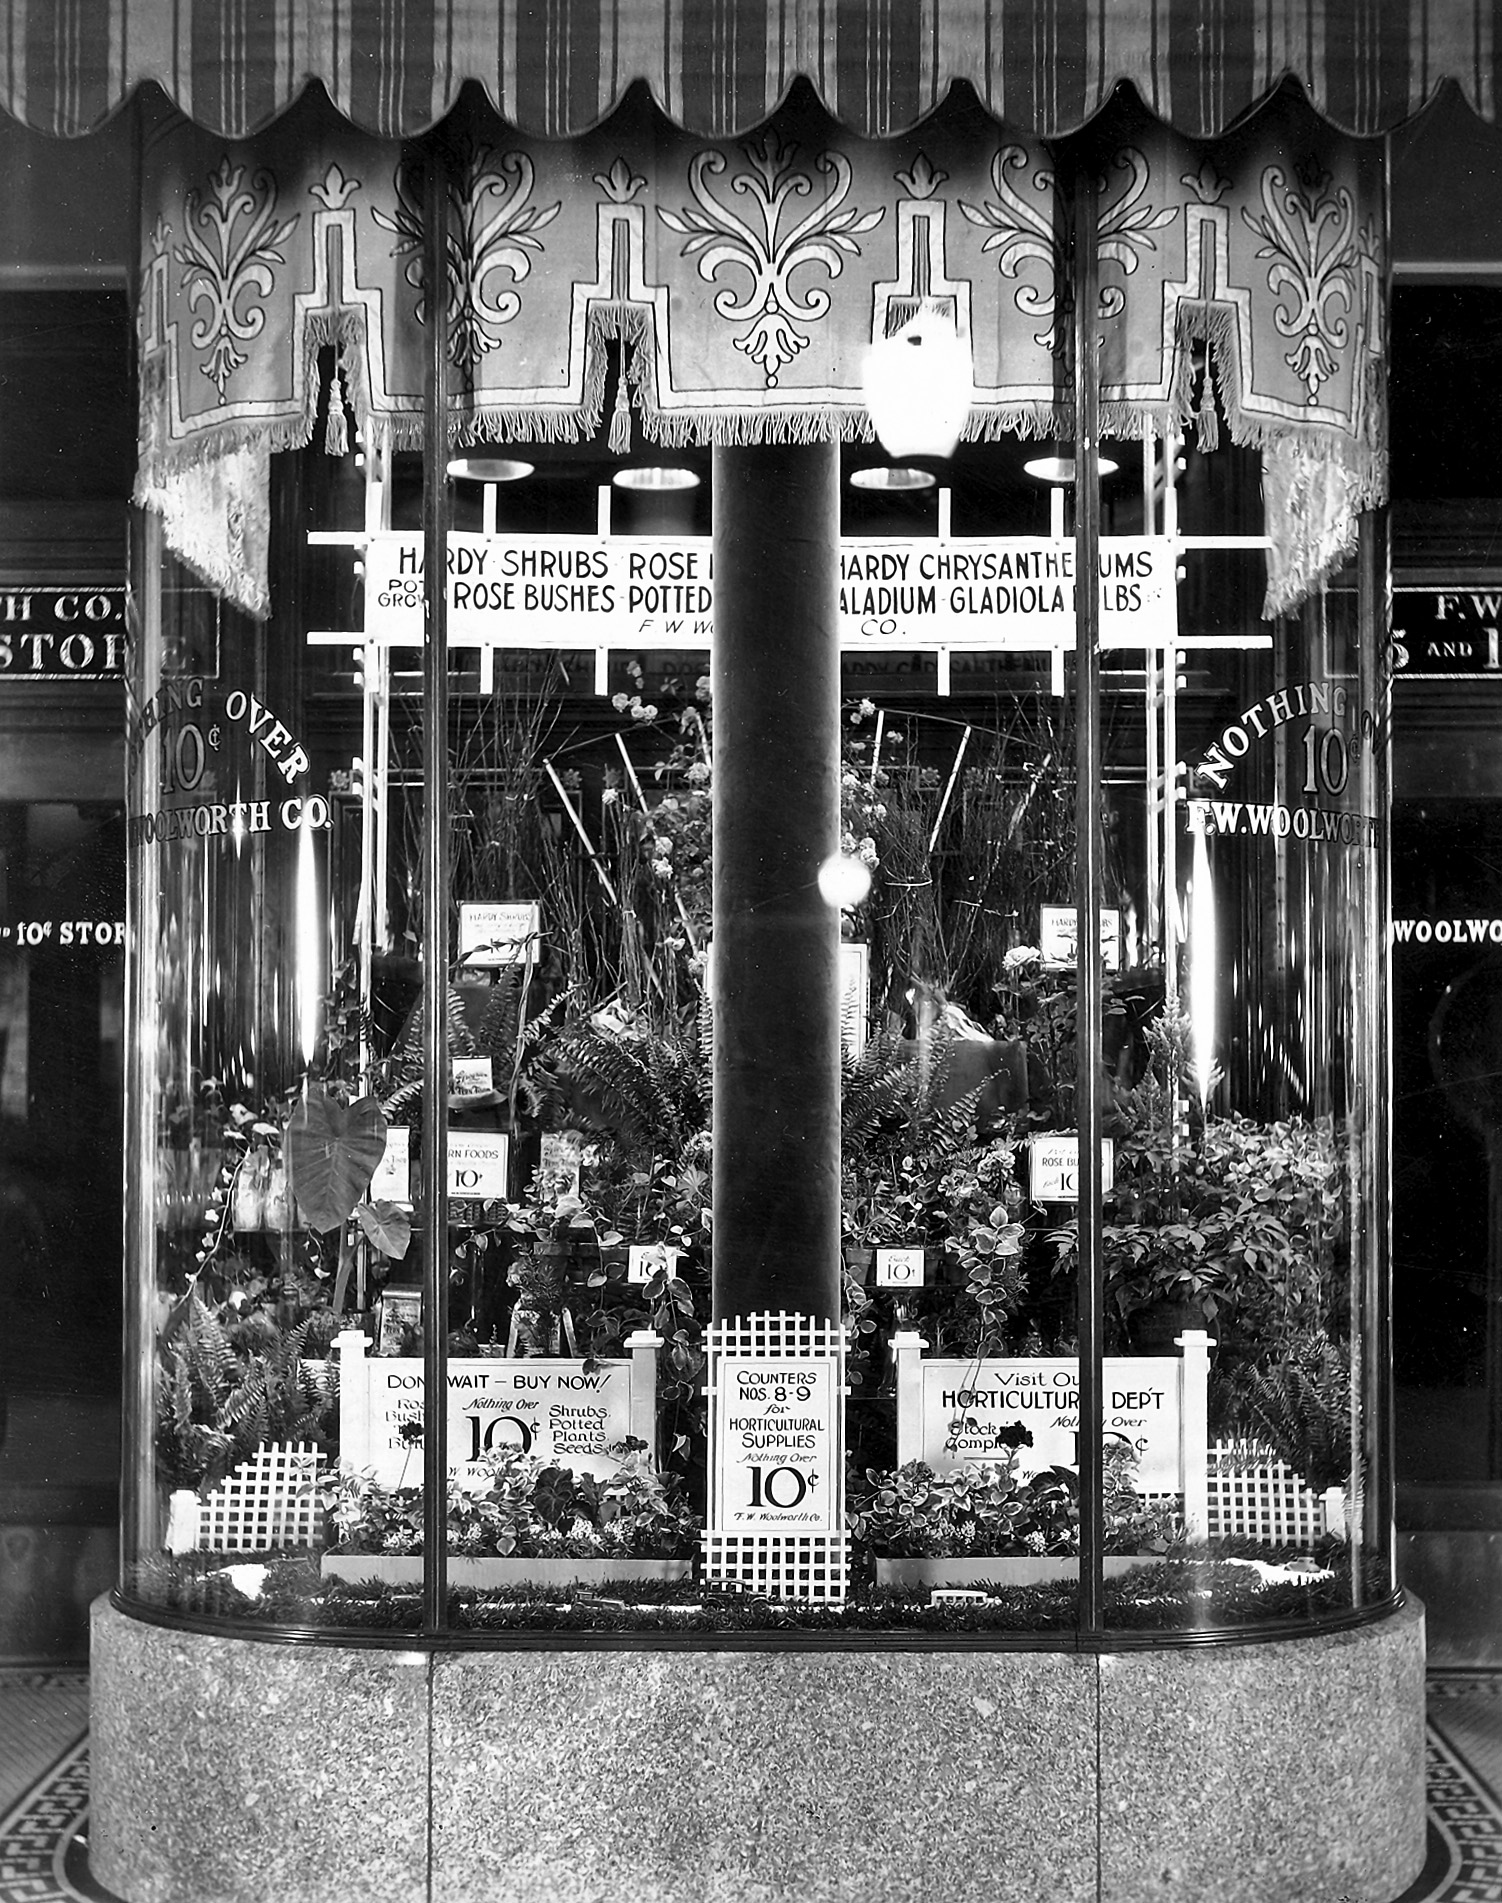 A window display from the 1920s from an F.W. Woolworth store in northwestern Ohio.  My great-uncle managed this store and invented the idea of selling live-plants at Woolworth's. View full size.